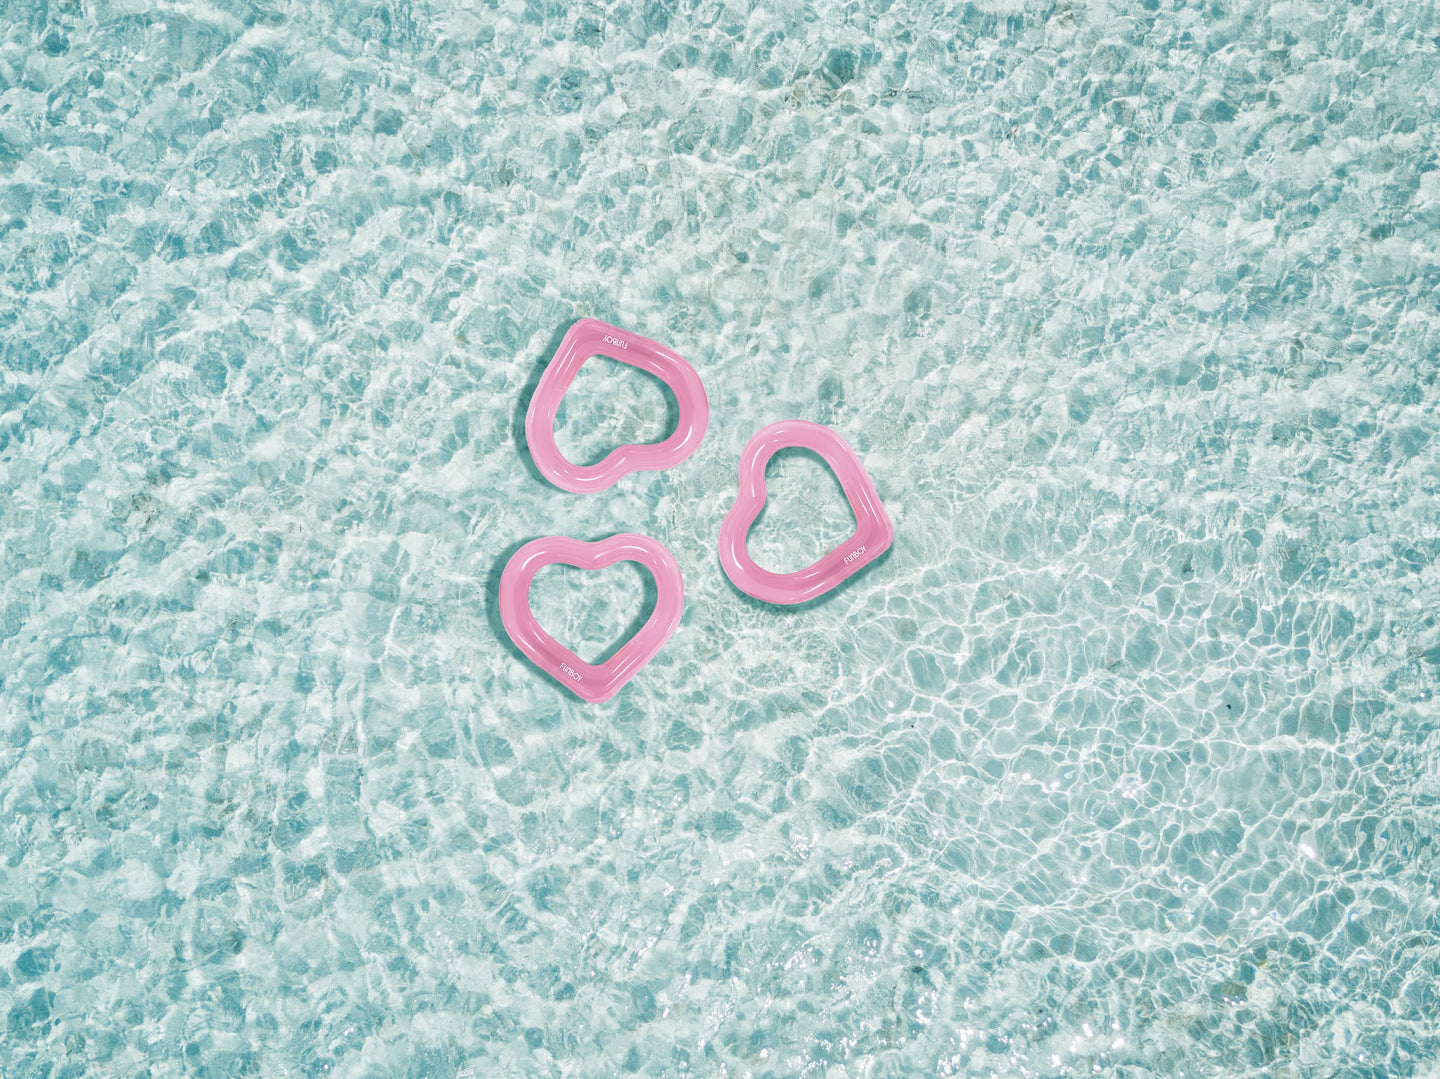 Funboy Clear Pink Heart Tubes Floating in Tropical Water